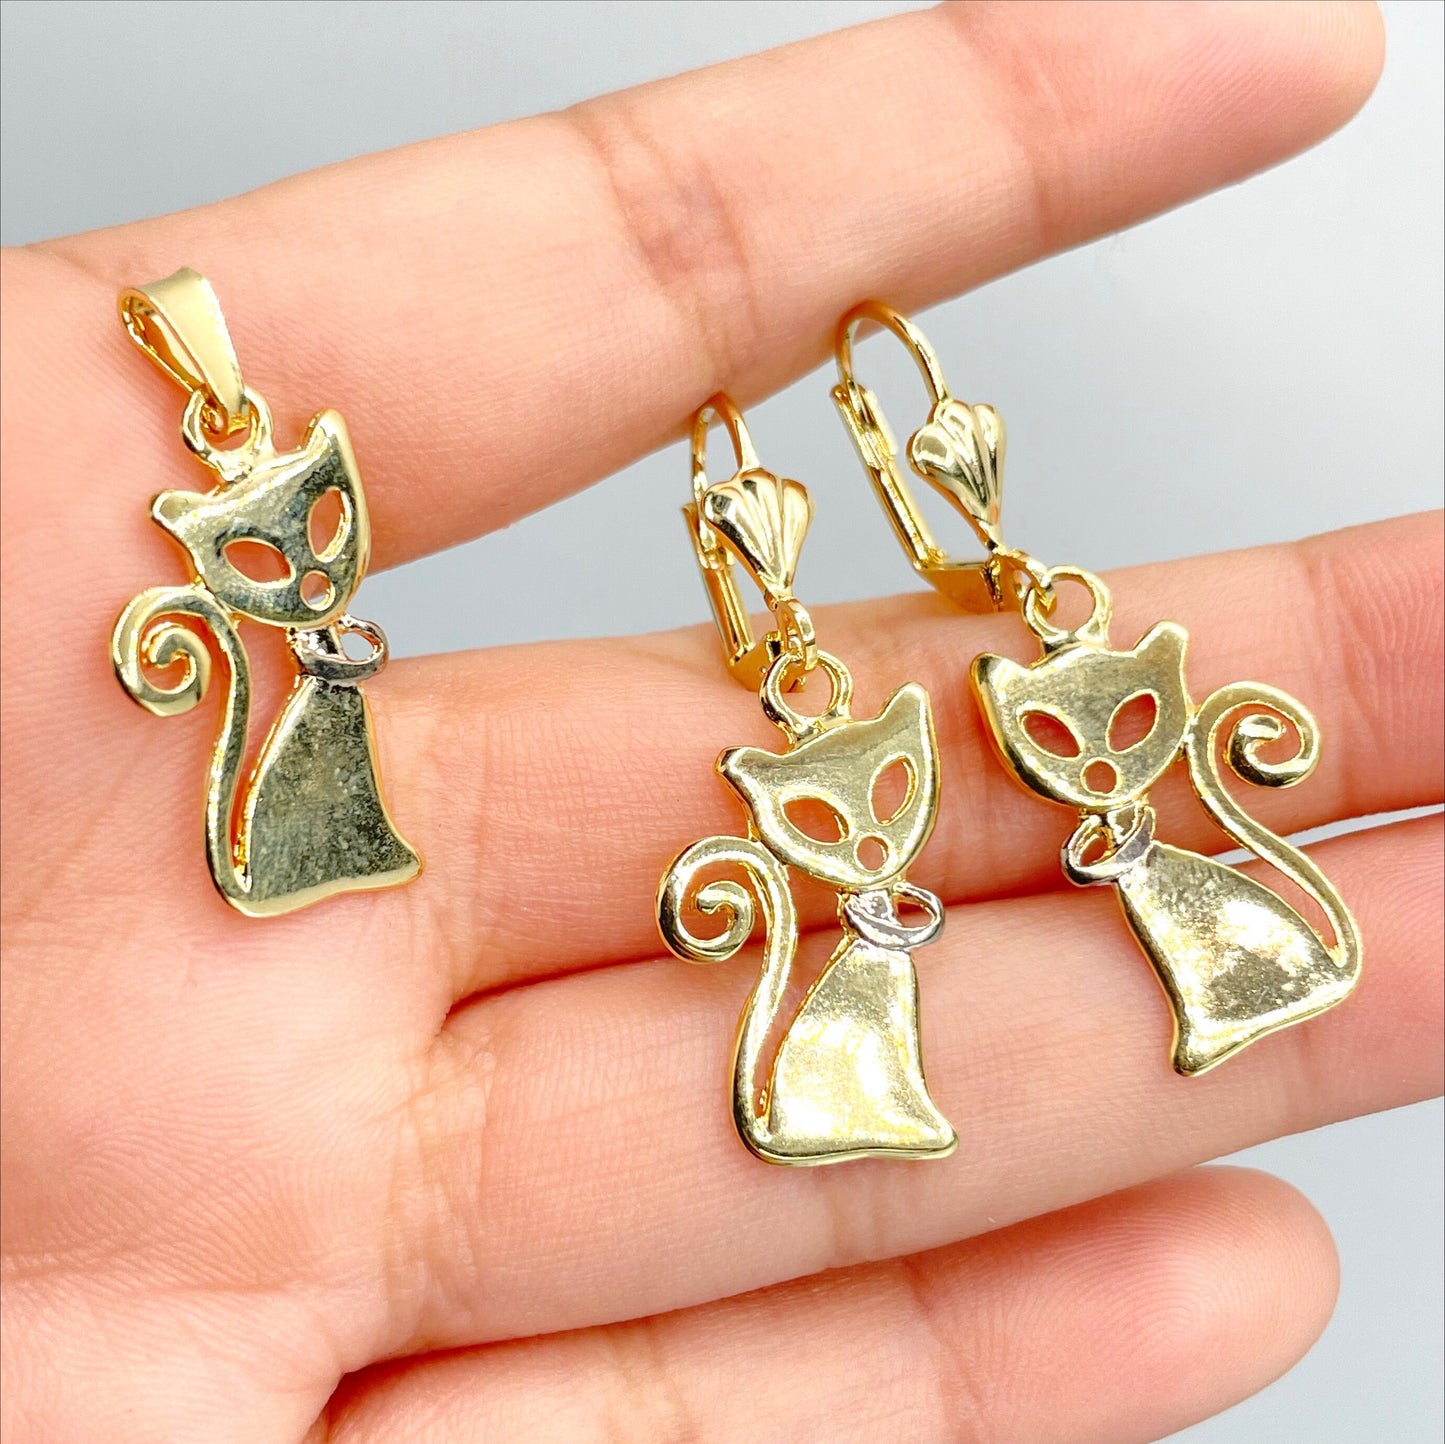 18k Gold Filled Cutie Charming Stylized Cat Shape Design Earrings and Pendant Set, Wholesale Jewelry Making Supplies